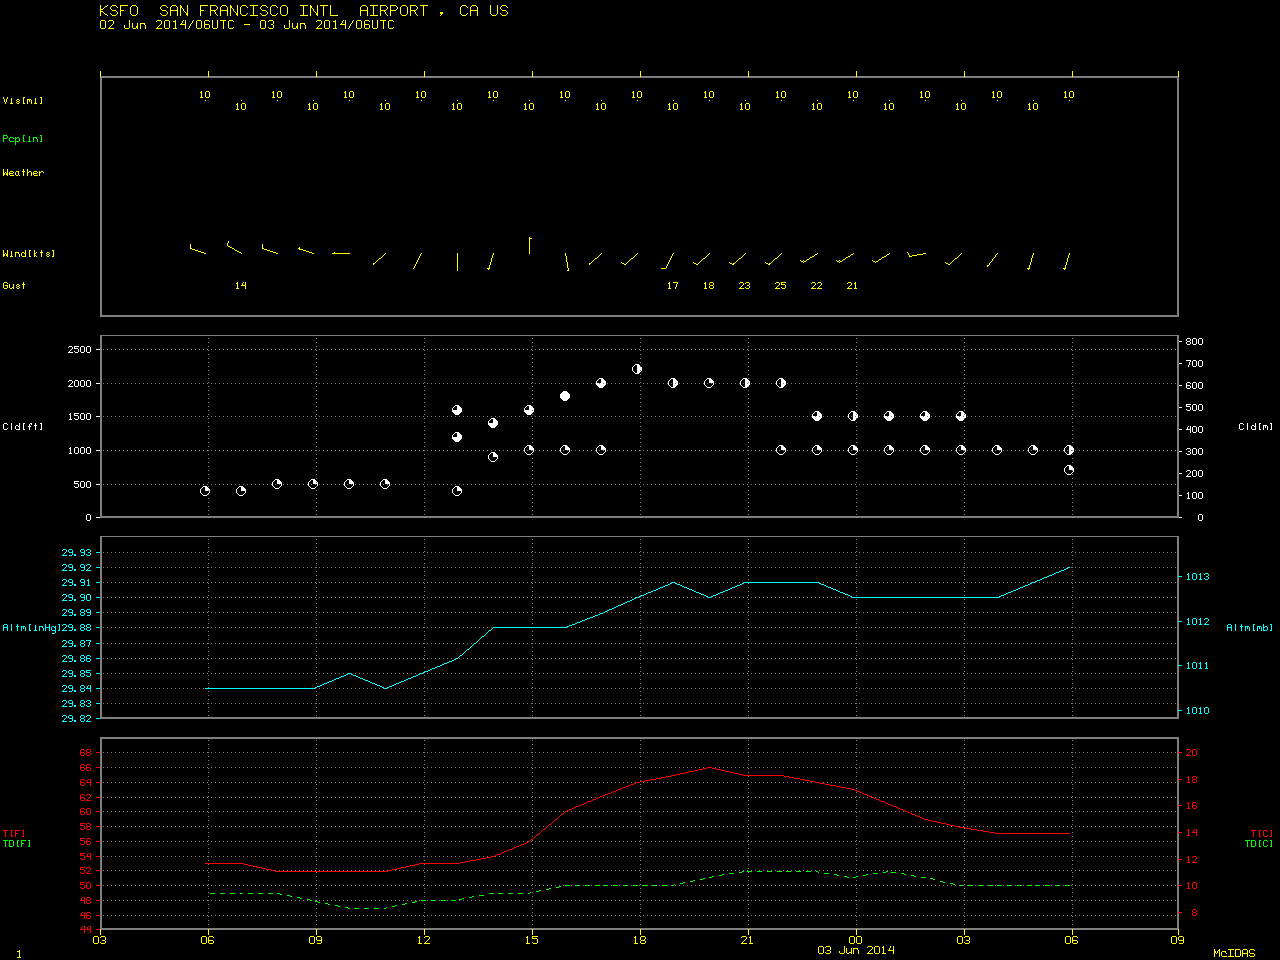 Time series of surface observations at San Francisco International Airport